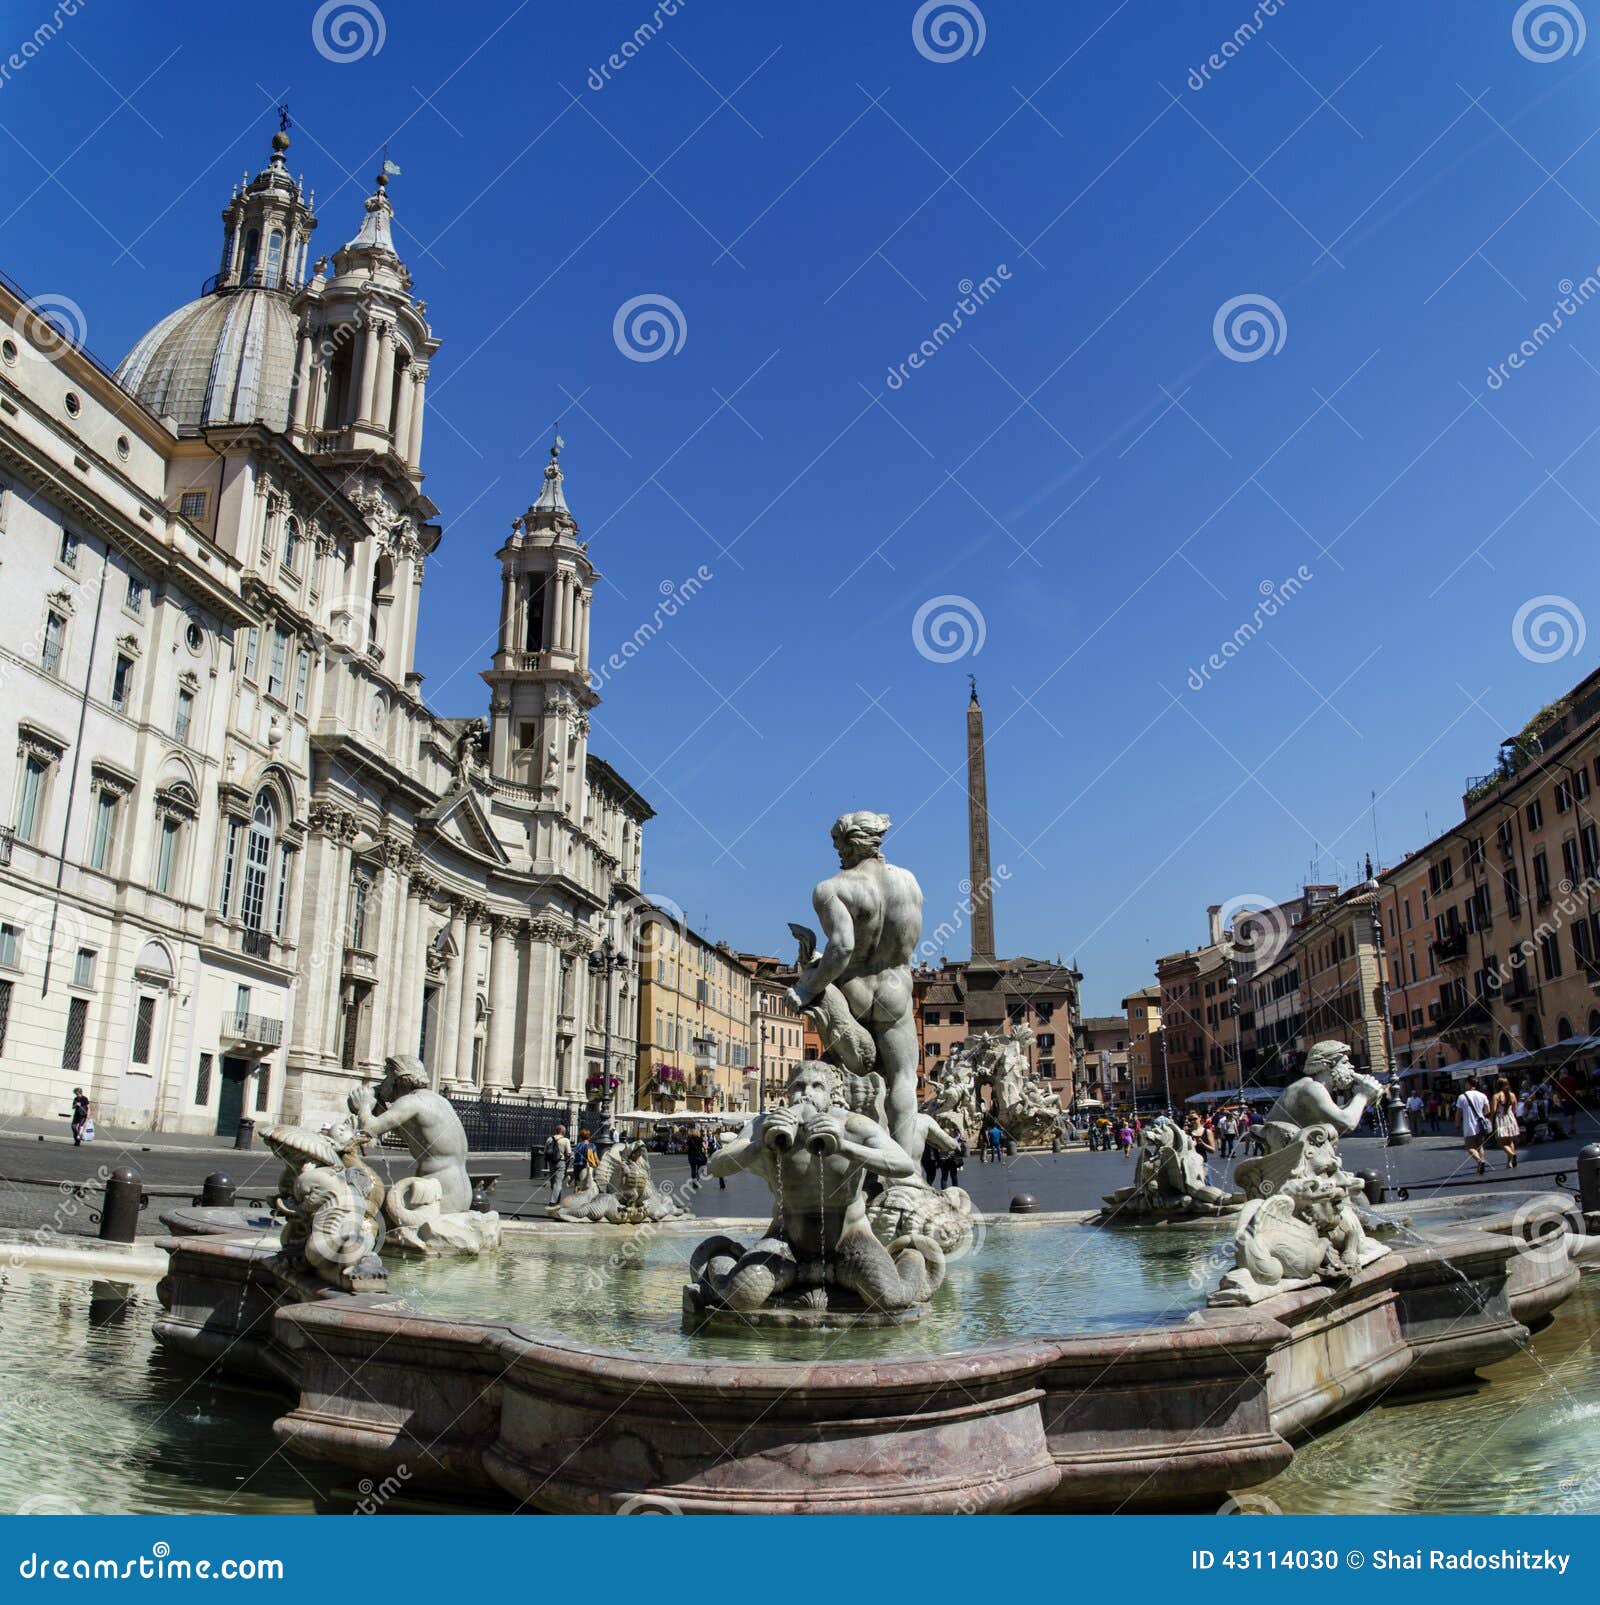 Piazza Navona Panoramic View Editorial Image - Image of cathedral ...